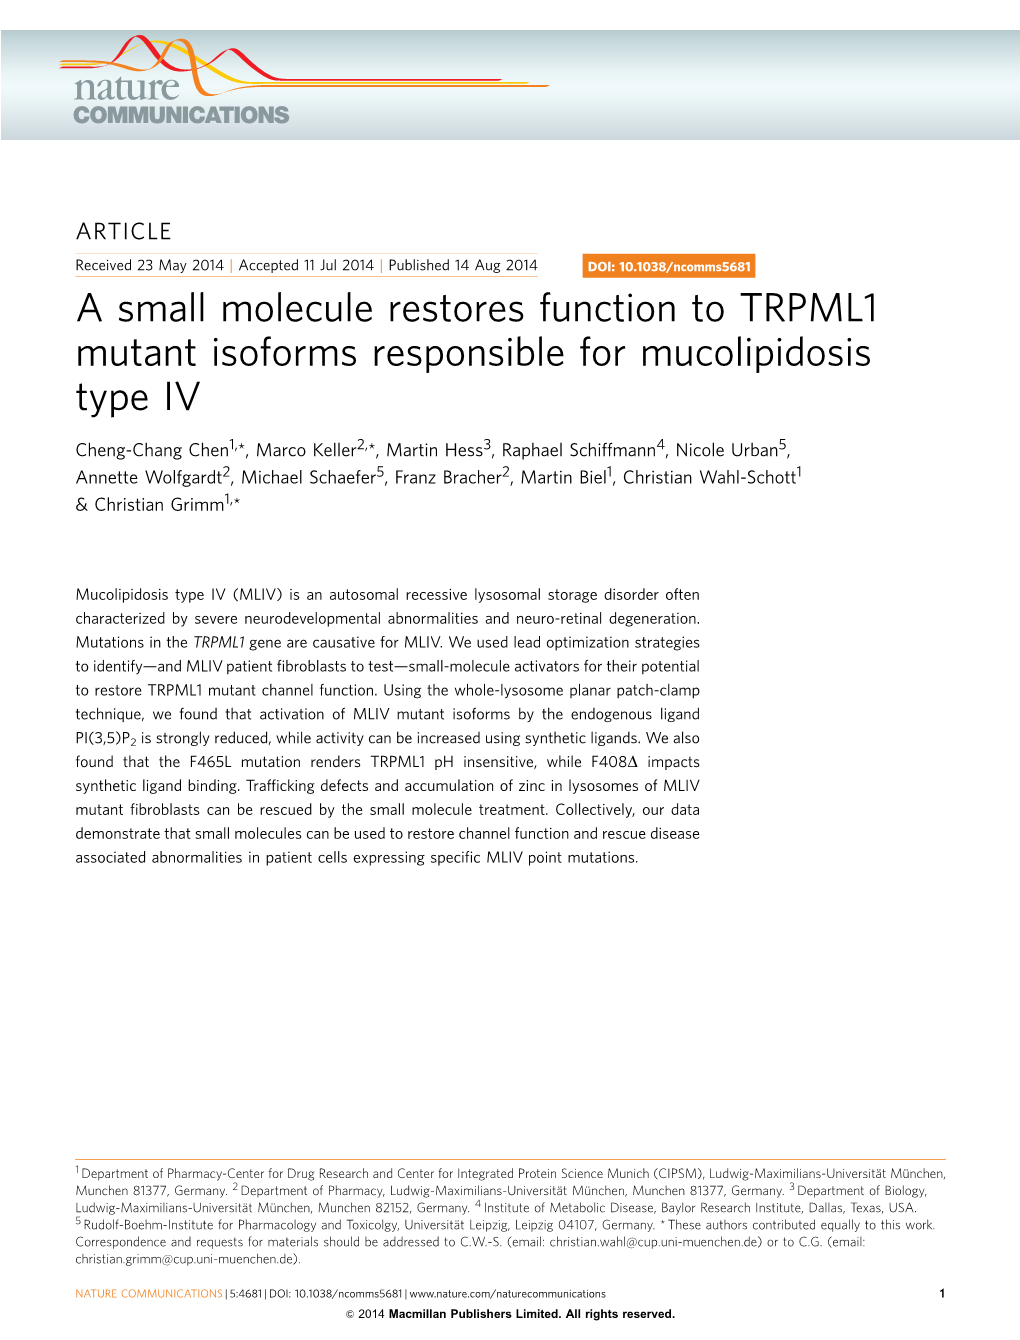 A Small Molecule Restores Function to TRPML1 Mutant Isoforms Responsible for Mucolipidosis Type IV